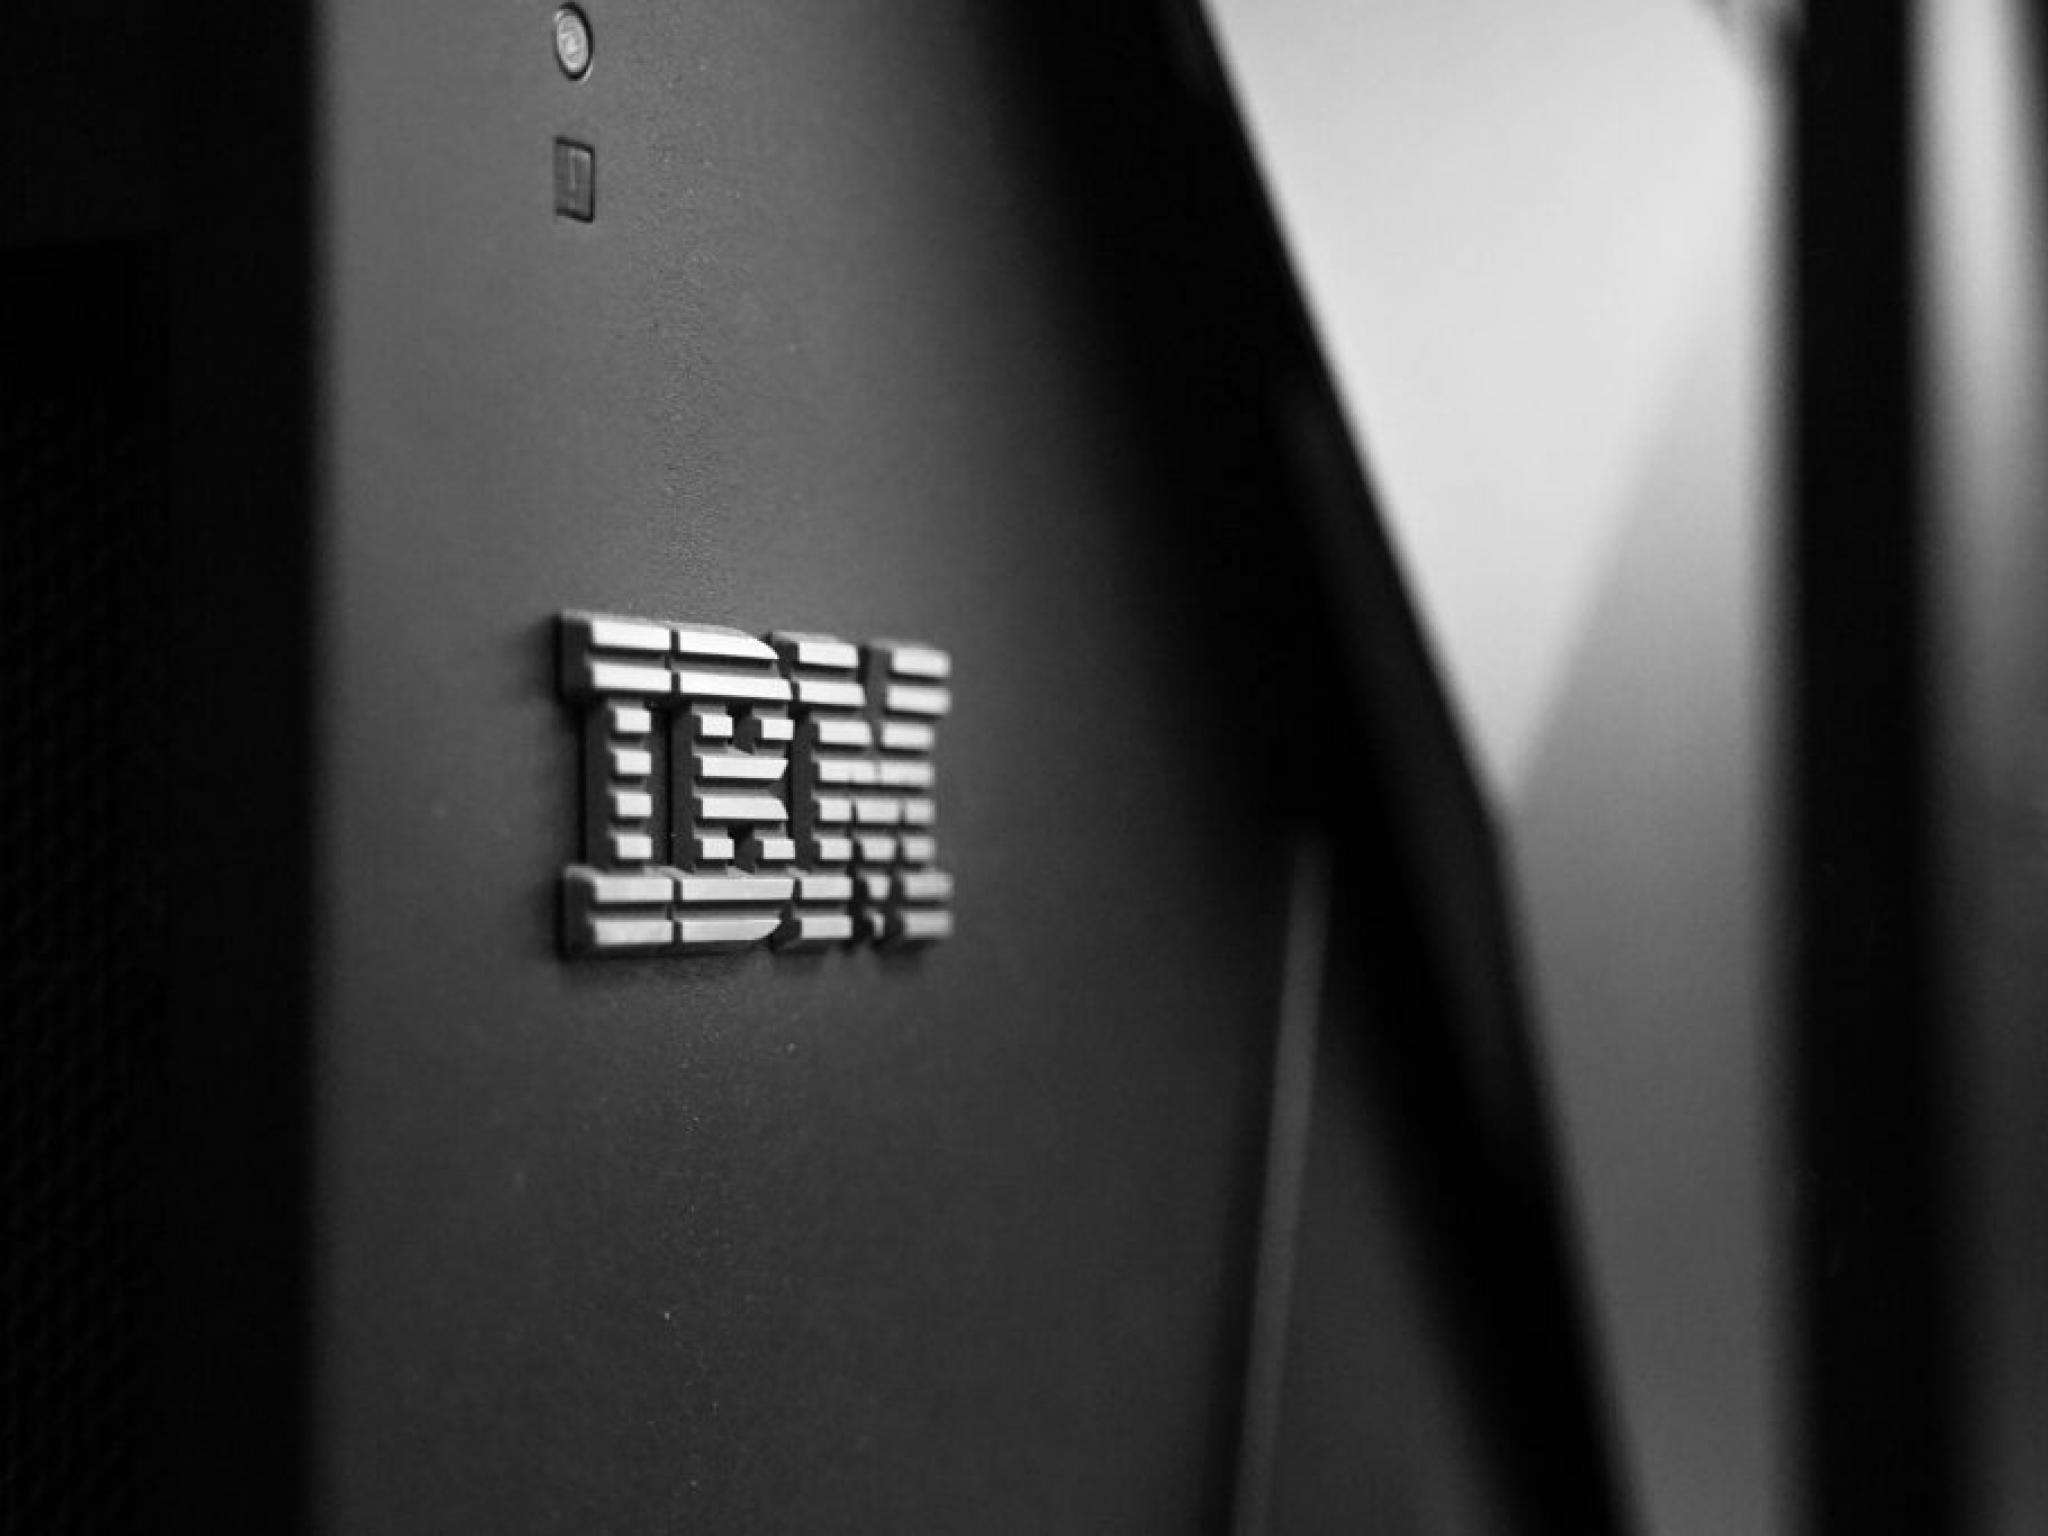  ibm-reports-weak-revenue-joins-meta-platforms-and-other-big-stocks-moving-lower-in-thursdays-pre-market-session 